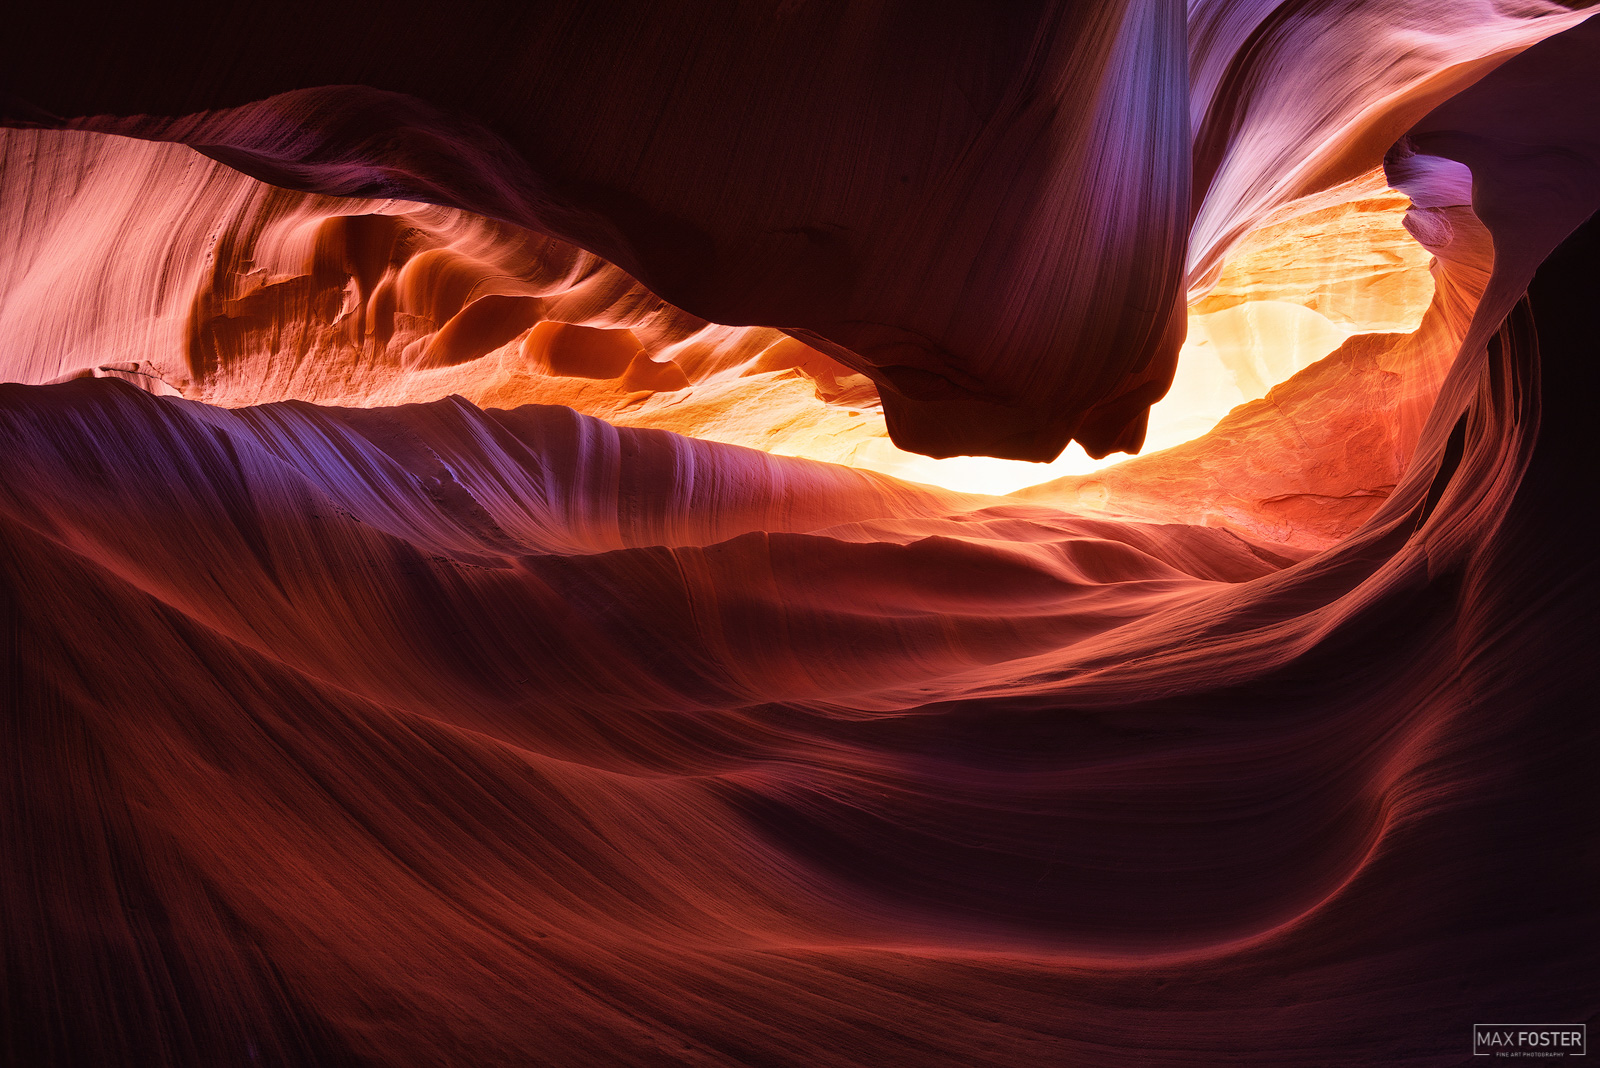 Elevate your space with Lava Flow, Max Foster's limited edition photography print of a slot canyon in Page, Arizona from his...